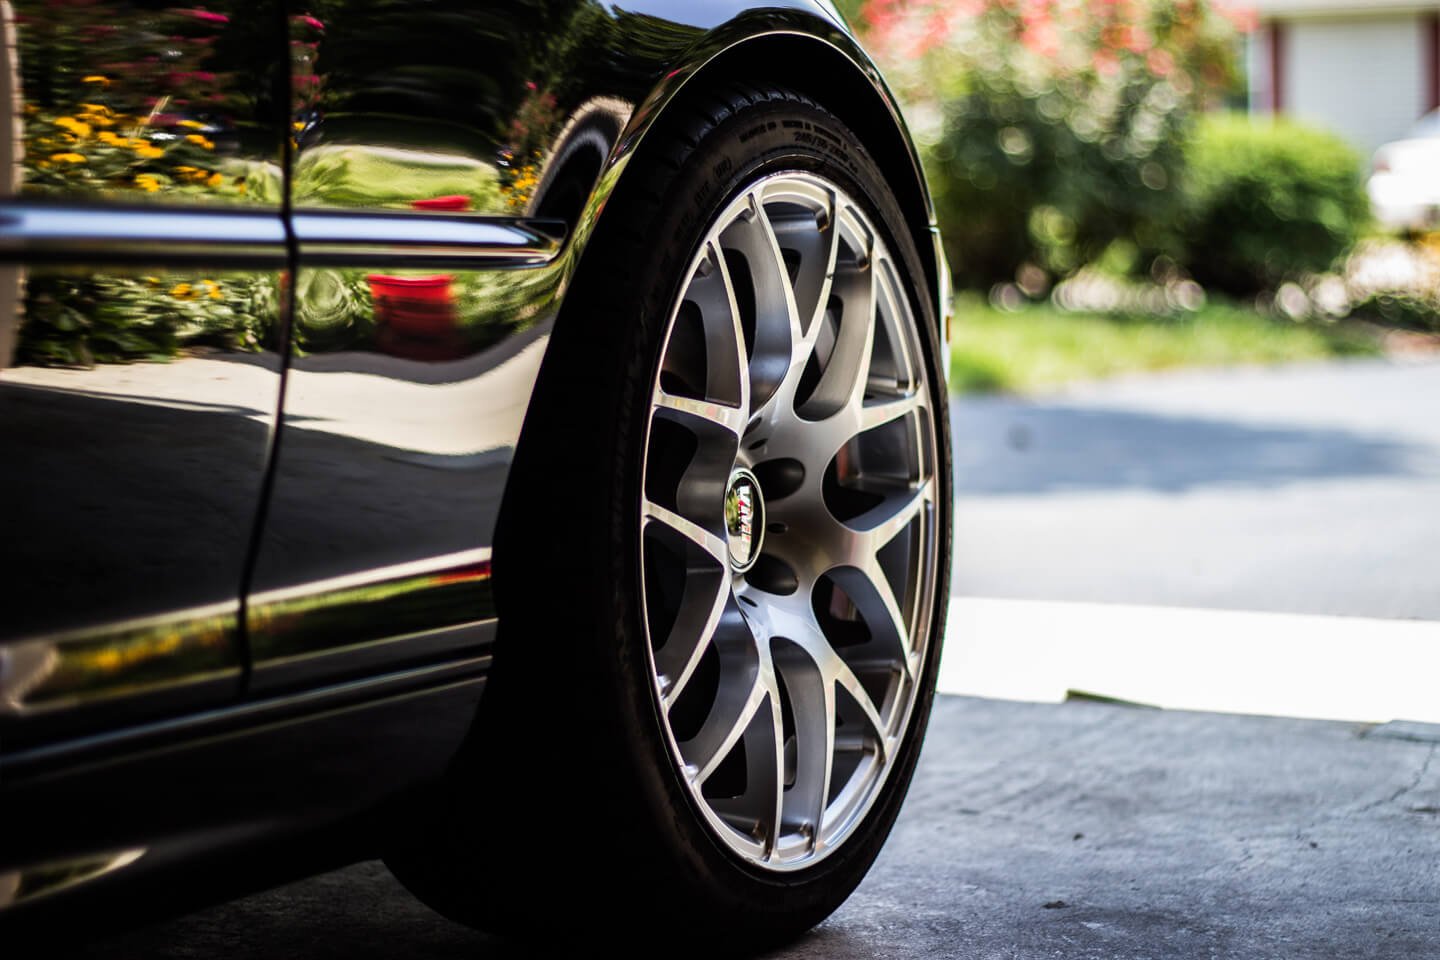 Why you need to hire professional for alloy wheel refurbishment Essex?